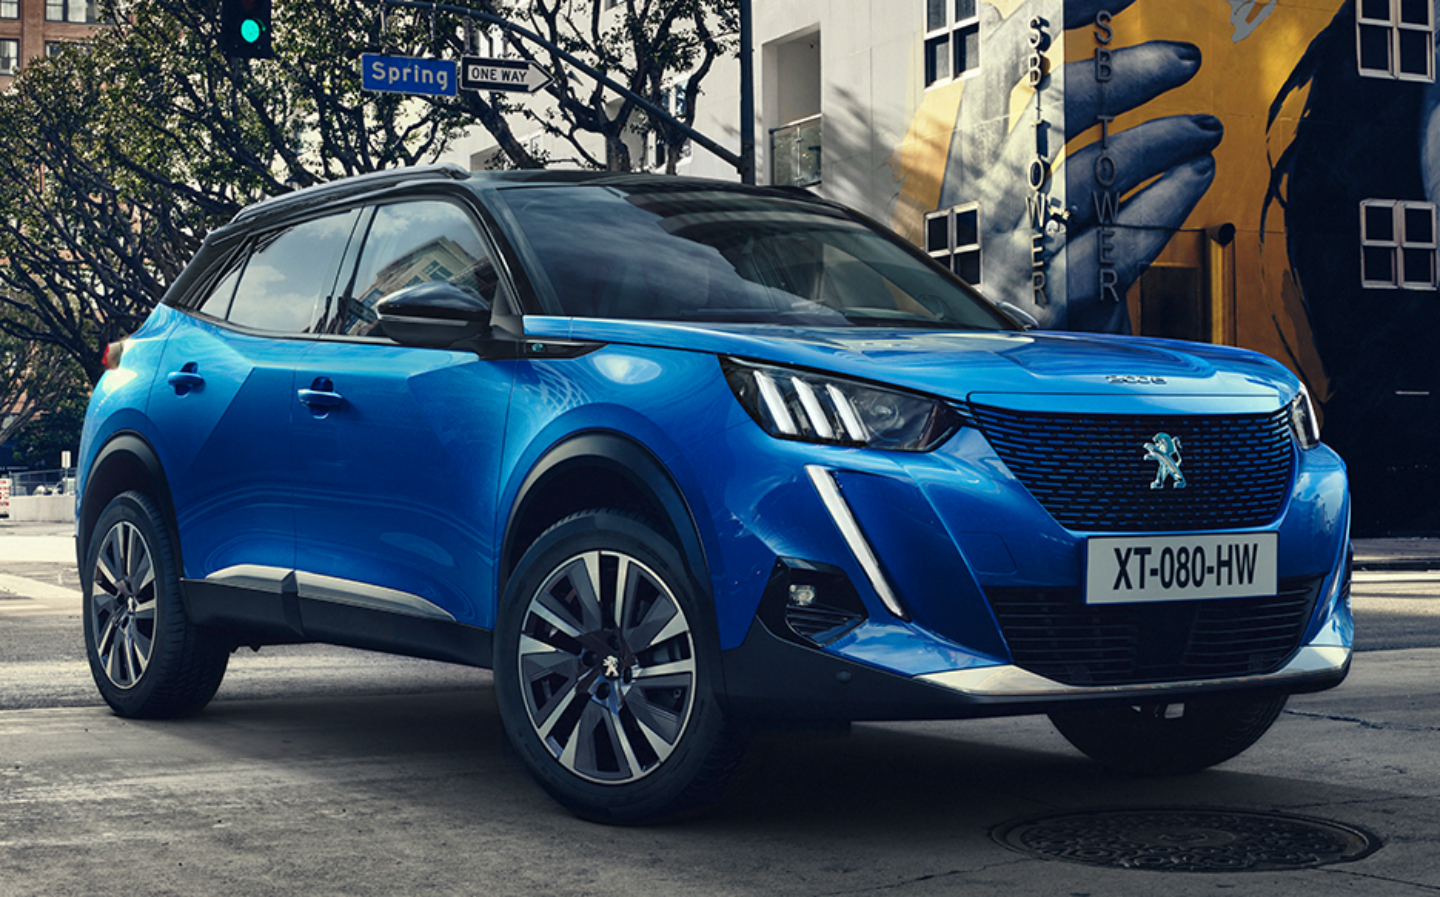 2020 Peugeot 2008 and e-2008: prices, details, electric range and